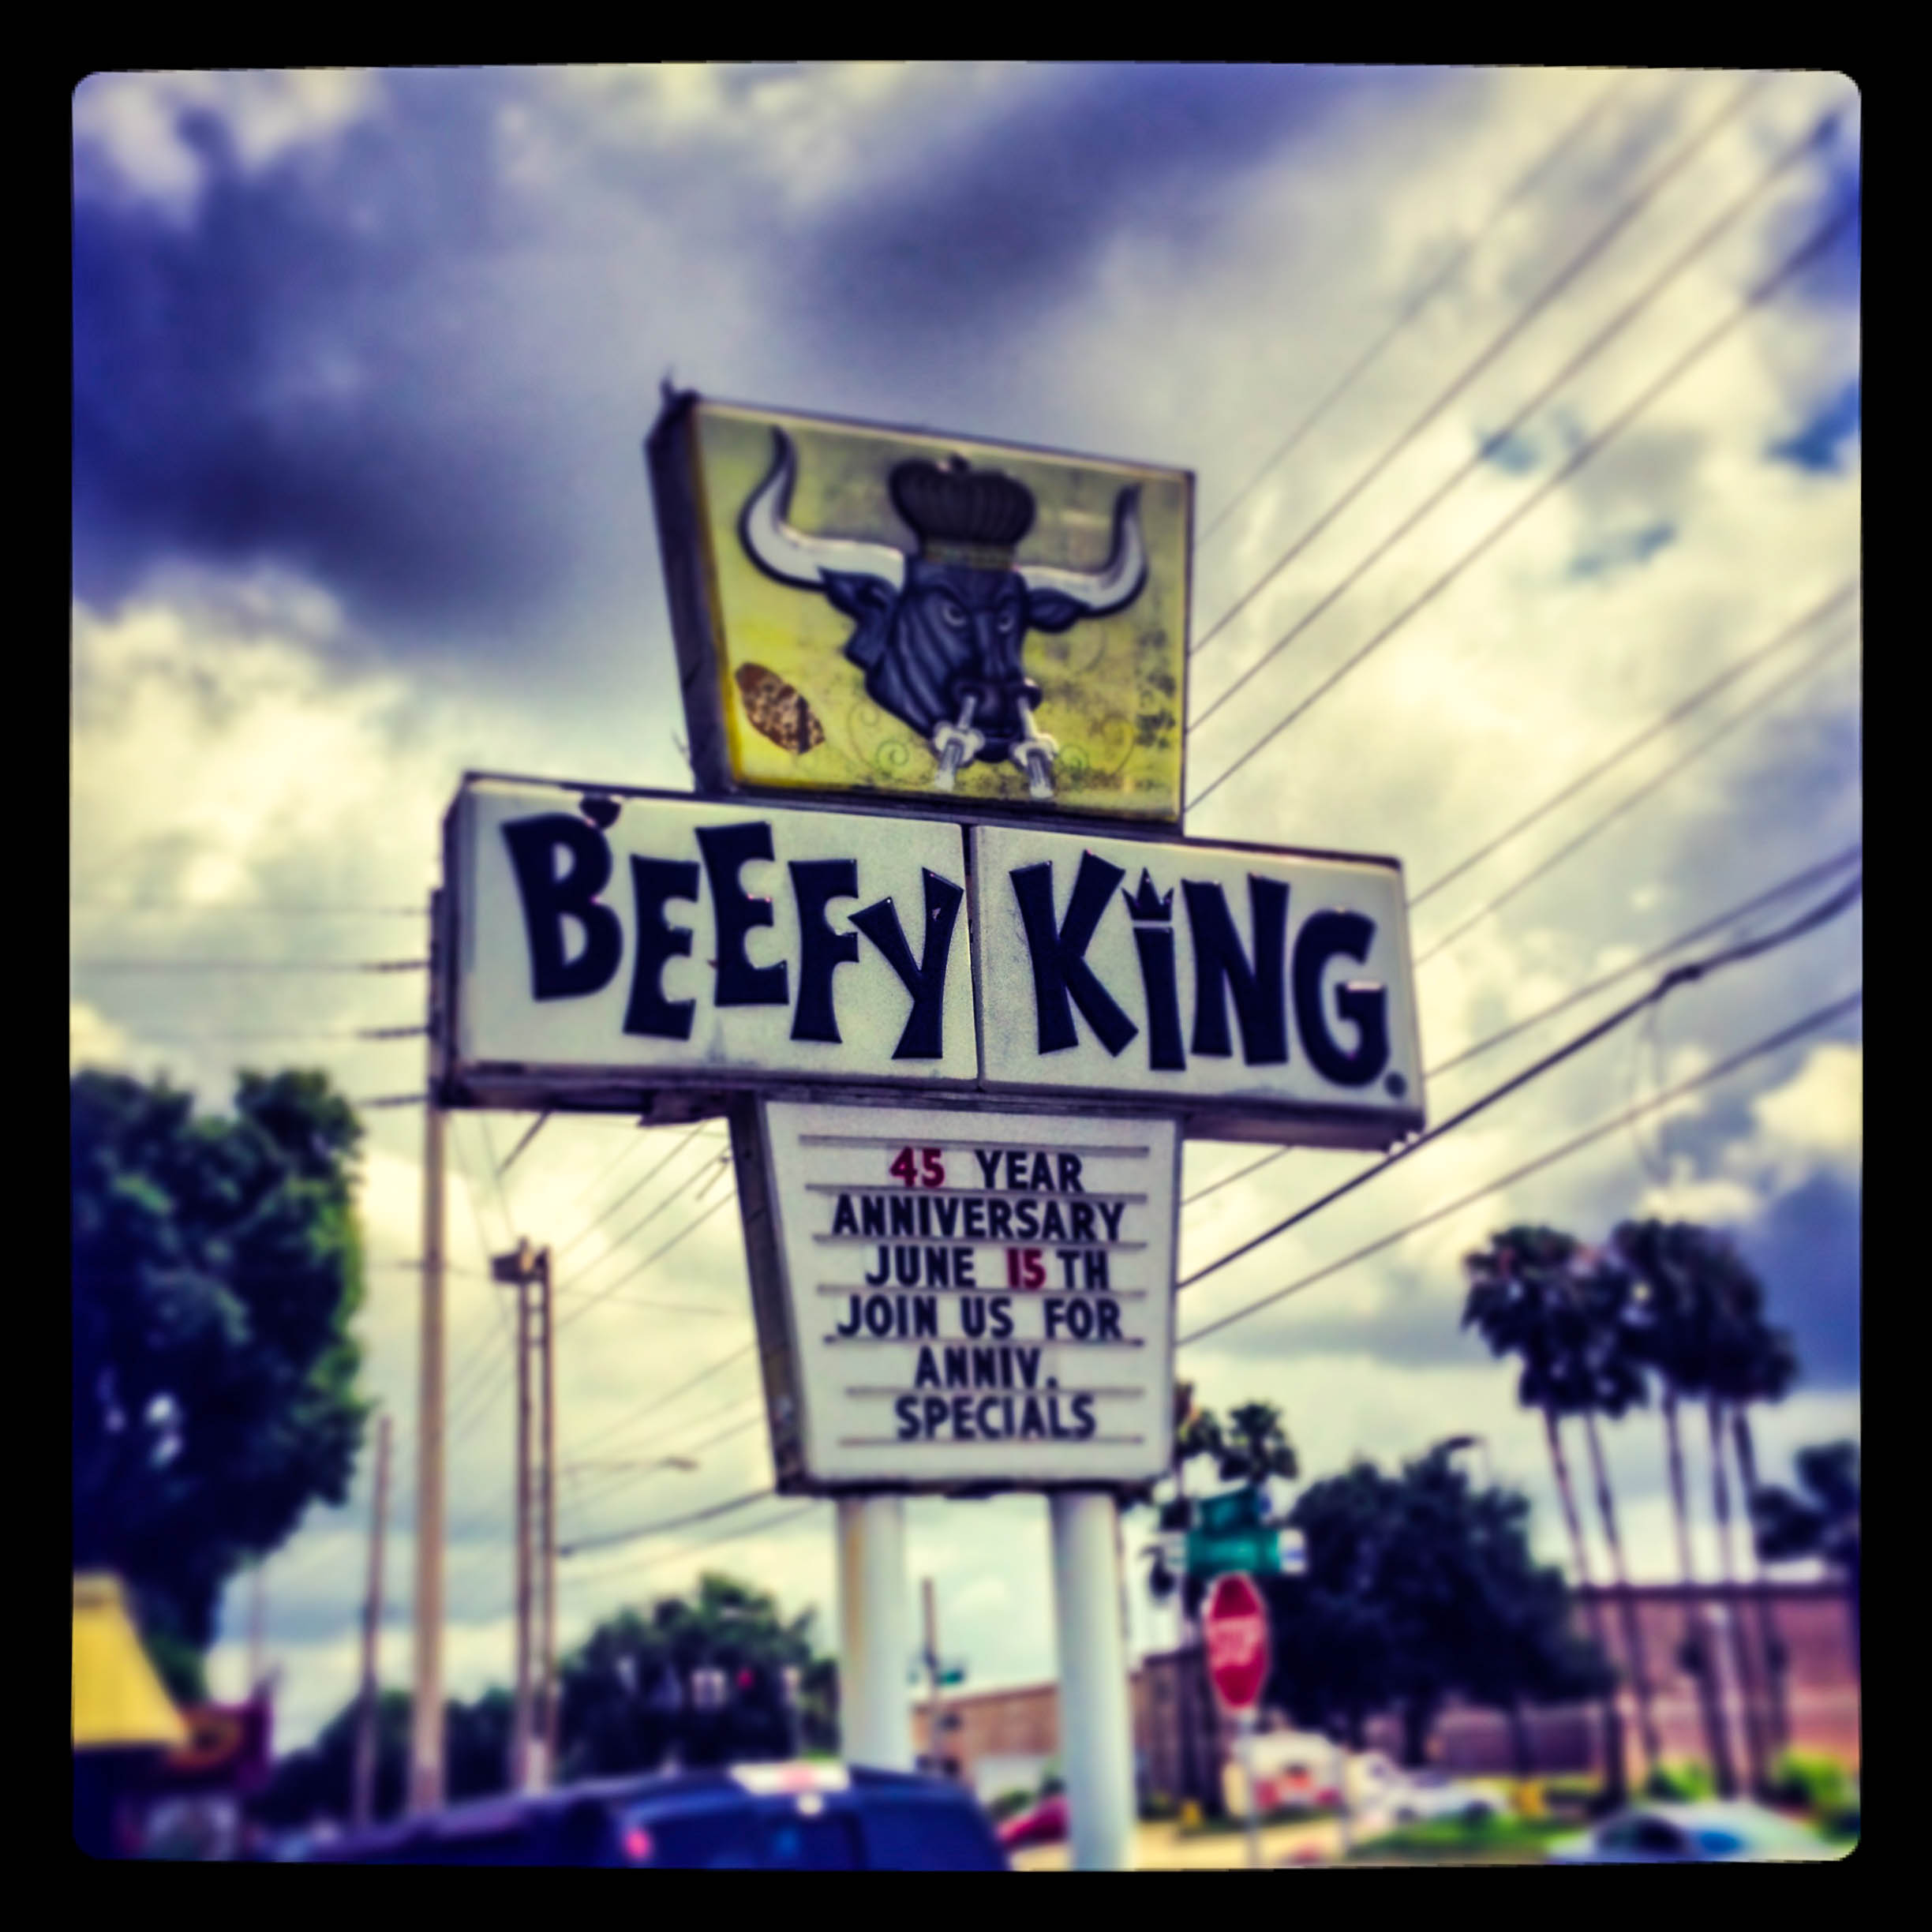 Beefy King’s 45th Anniversary